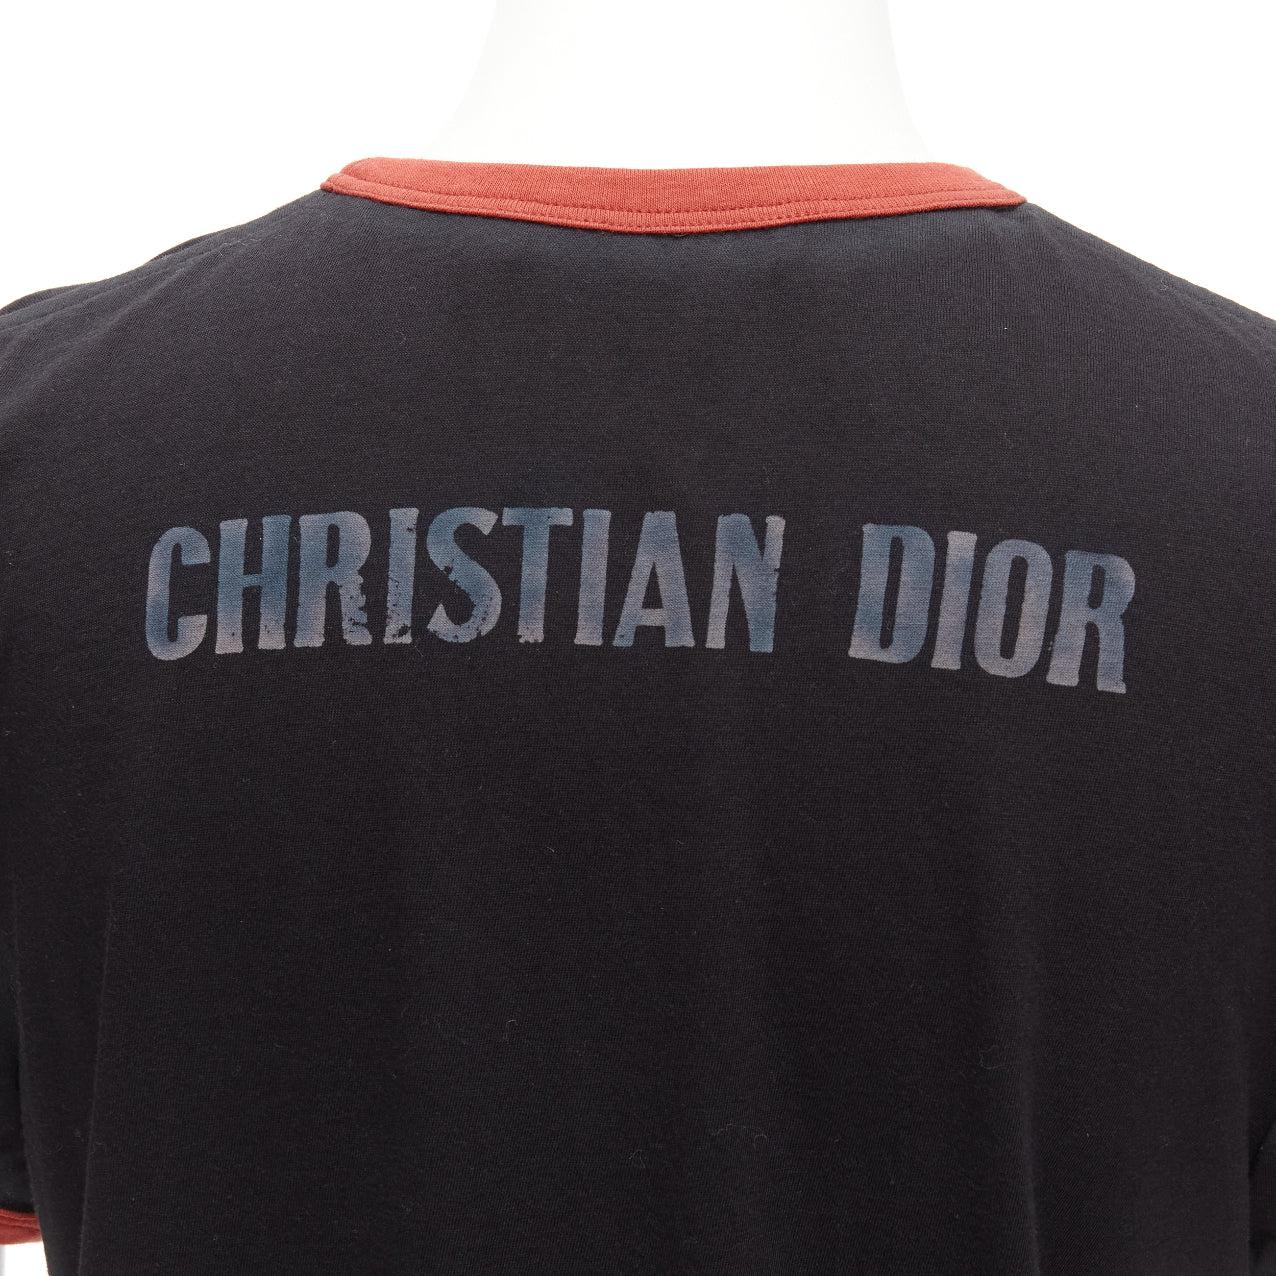 rare DIOR Valentines black red J'adior Paris vintage print ringer tshirt XS
Reference: AAWC/A00771
Brand: Dior
Designer: Maria Grazia Chiuri
Collection: Valentines
Material: Cotton
Color: Black, Red
Pattern: Solid
Closure: Slip On
Extra Details: